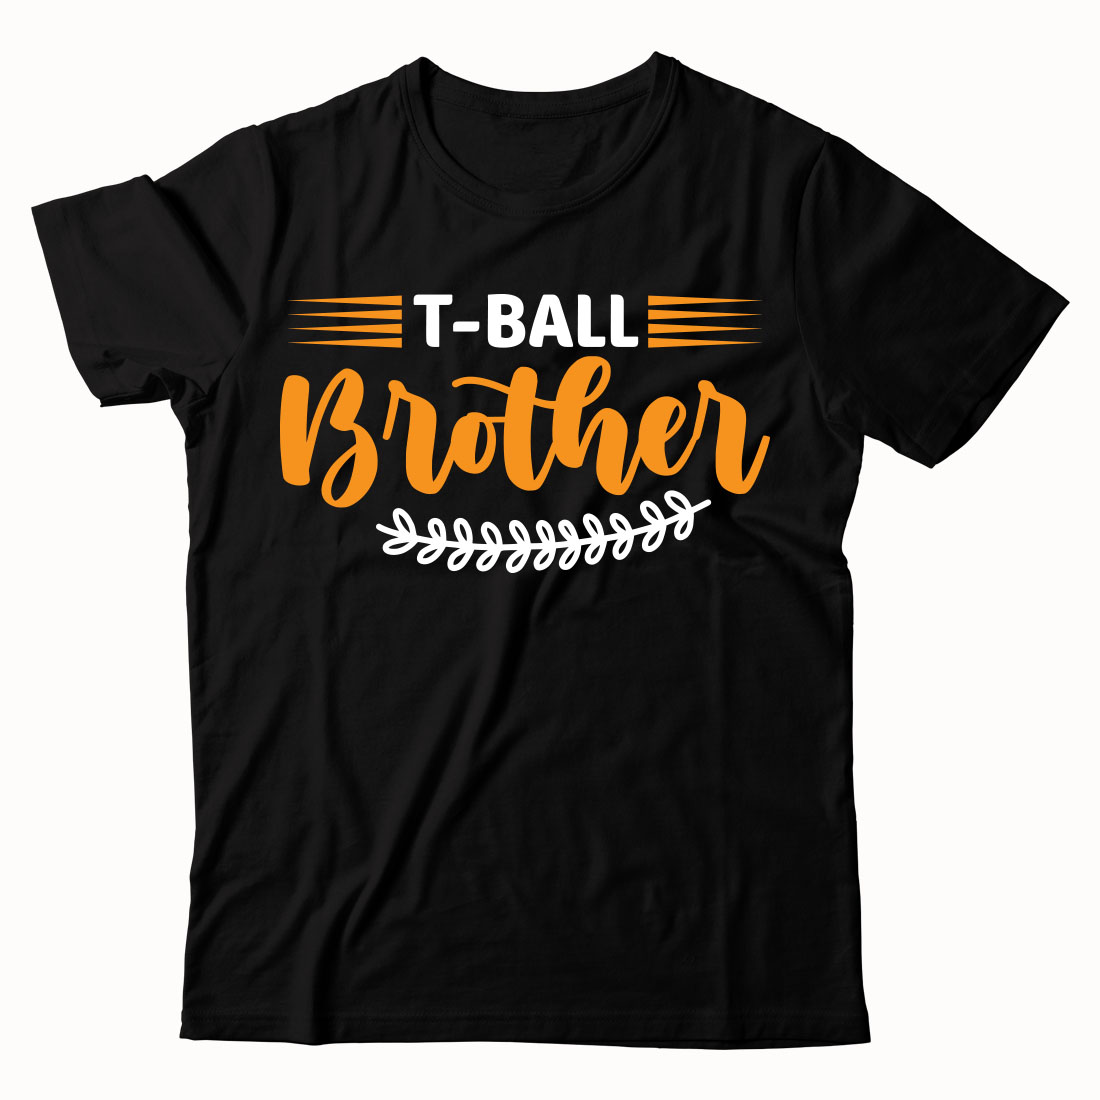 Black t - shirt that says t - ball brother.